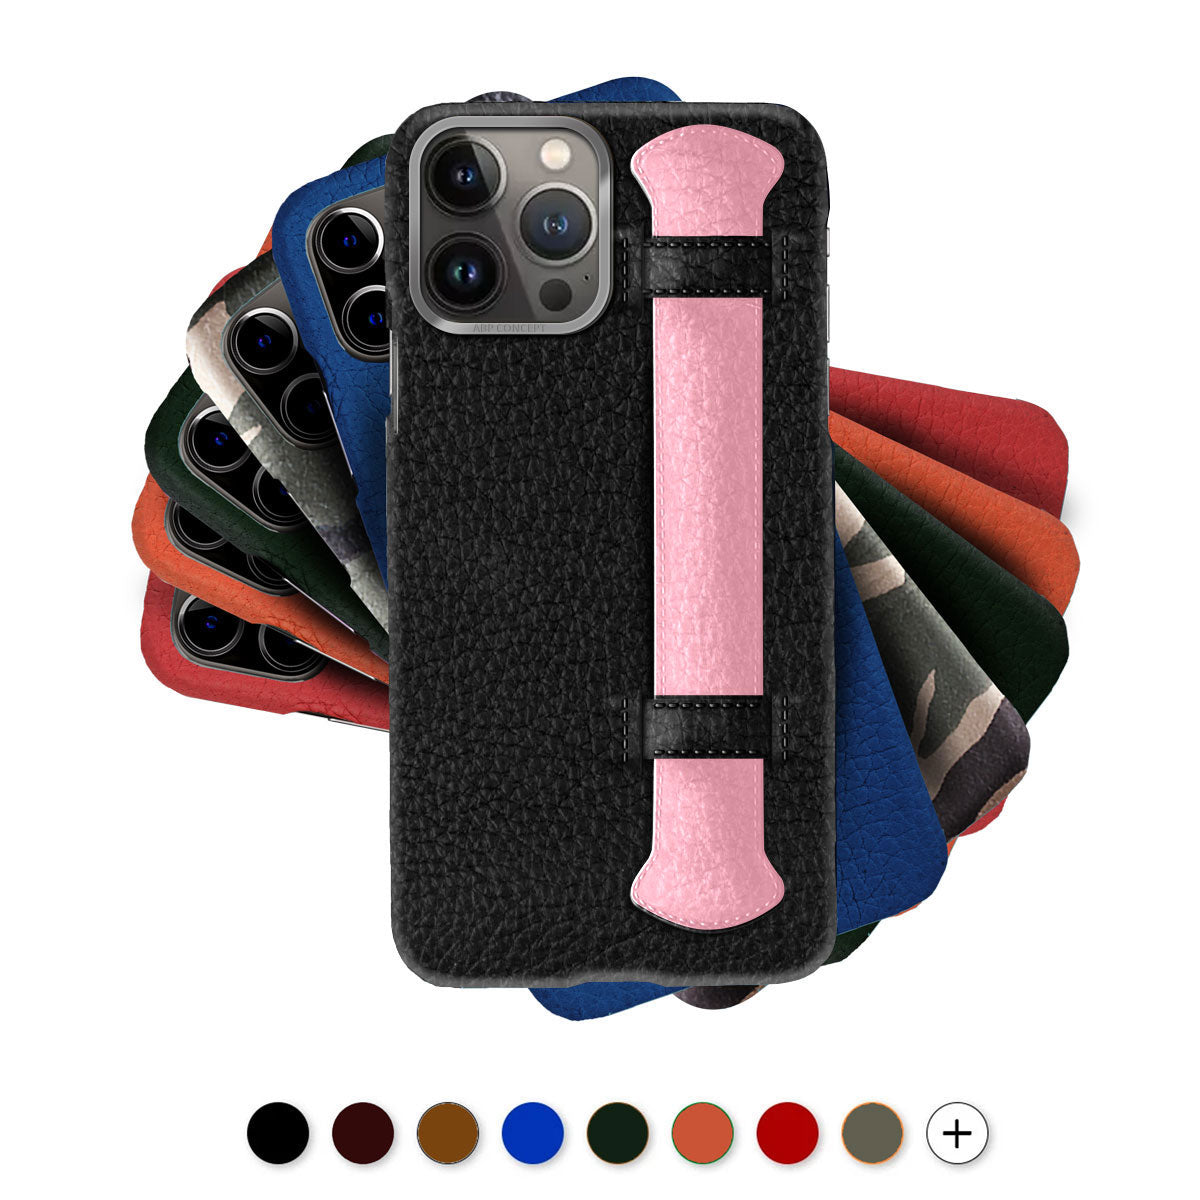 Leather iPhone HIMALAYA Strap case / cover - iPhone 13 ( Pro